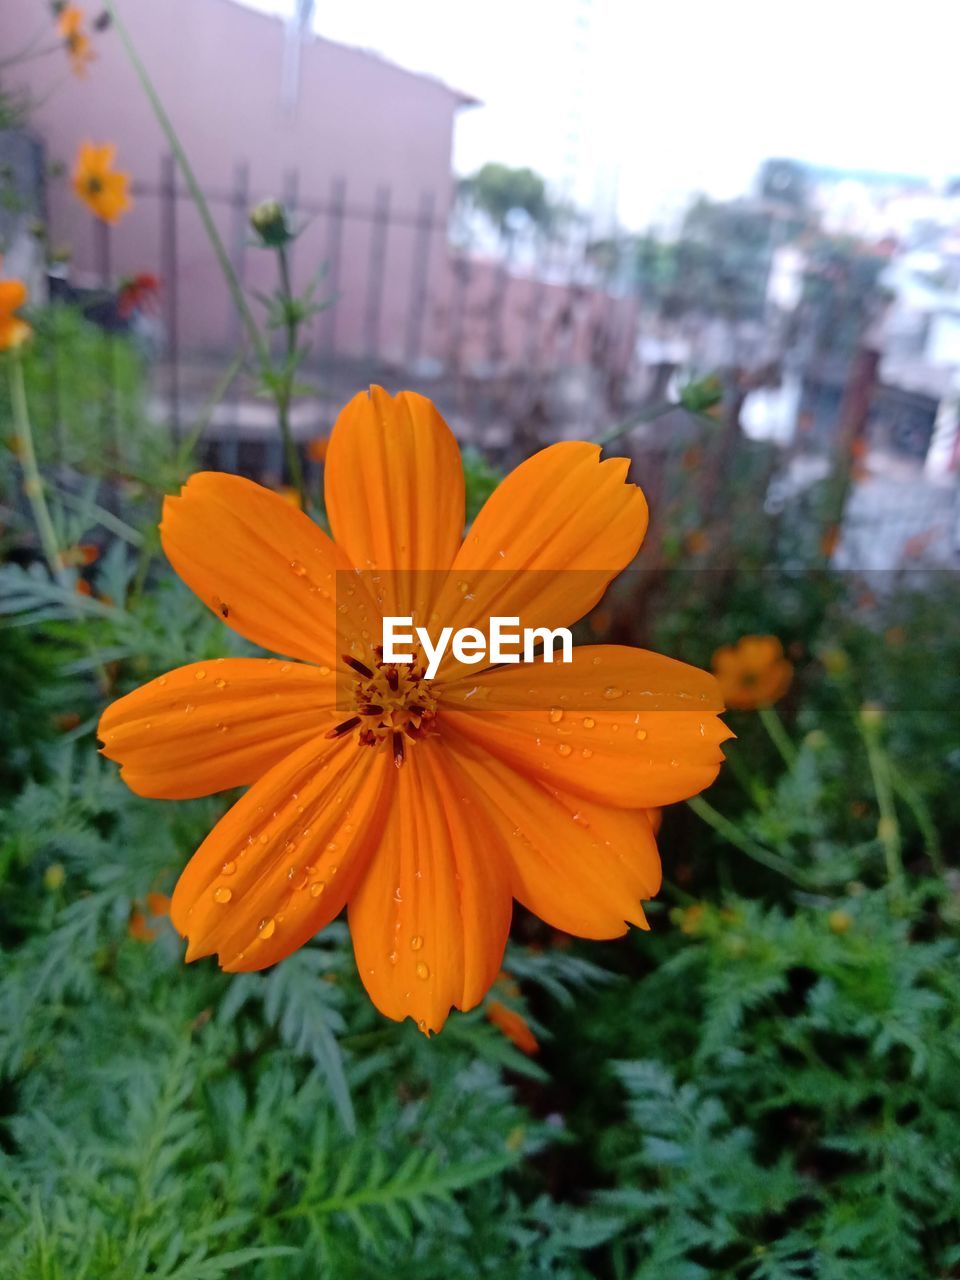 plant, flower, flowering plant, freshness, beauty in nature, yellow, growth, flower head, close-up, nature, orange color, petal, fragility, inflorescence, focus on foreground, no people, day, outdoors, pollen, botany, wildflower, leaf, meadow